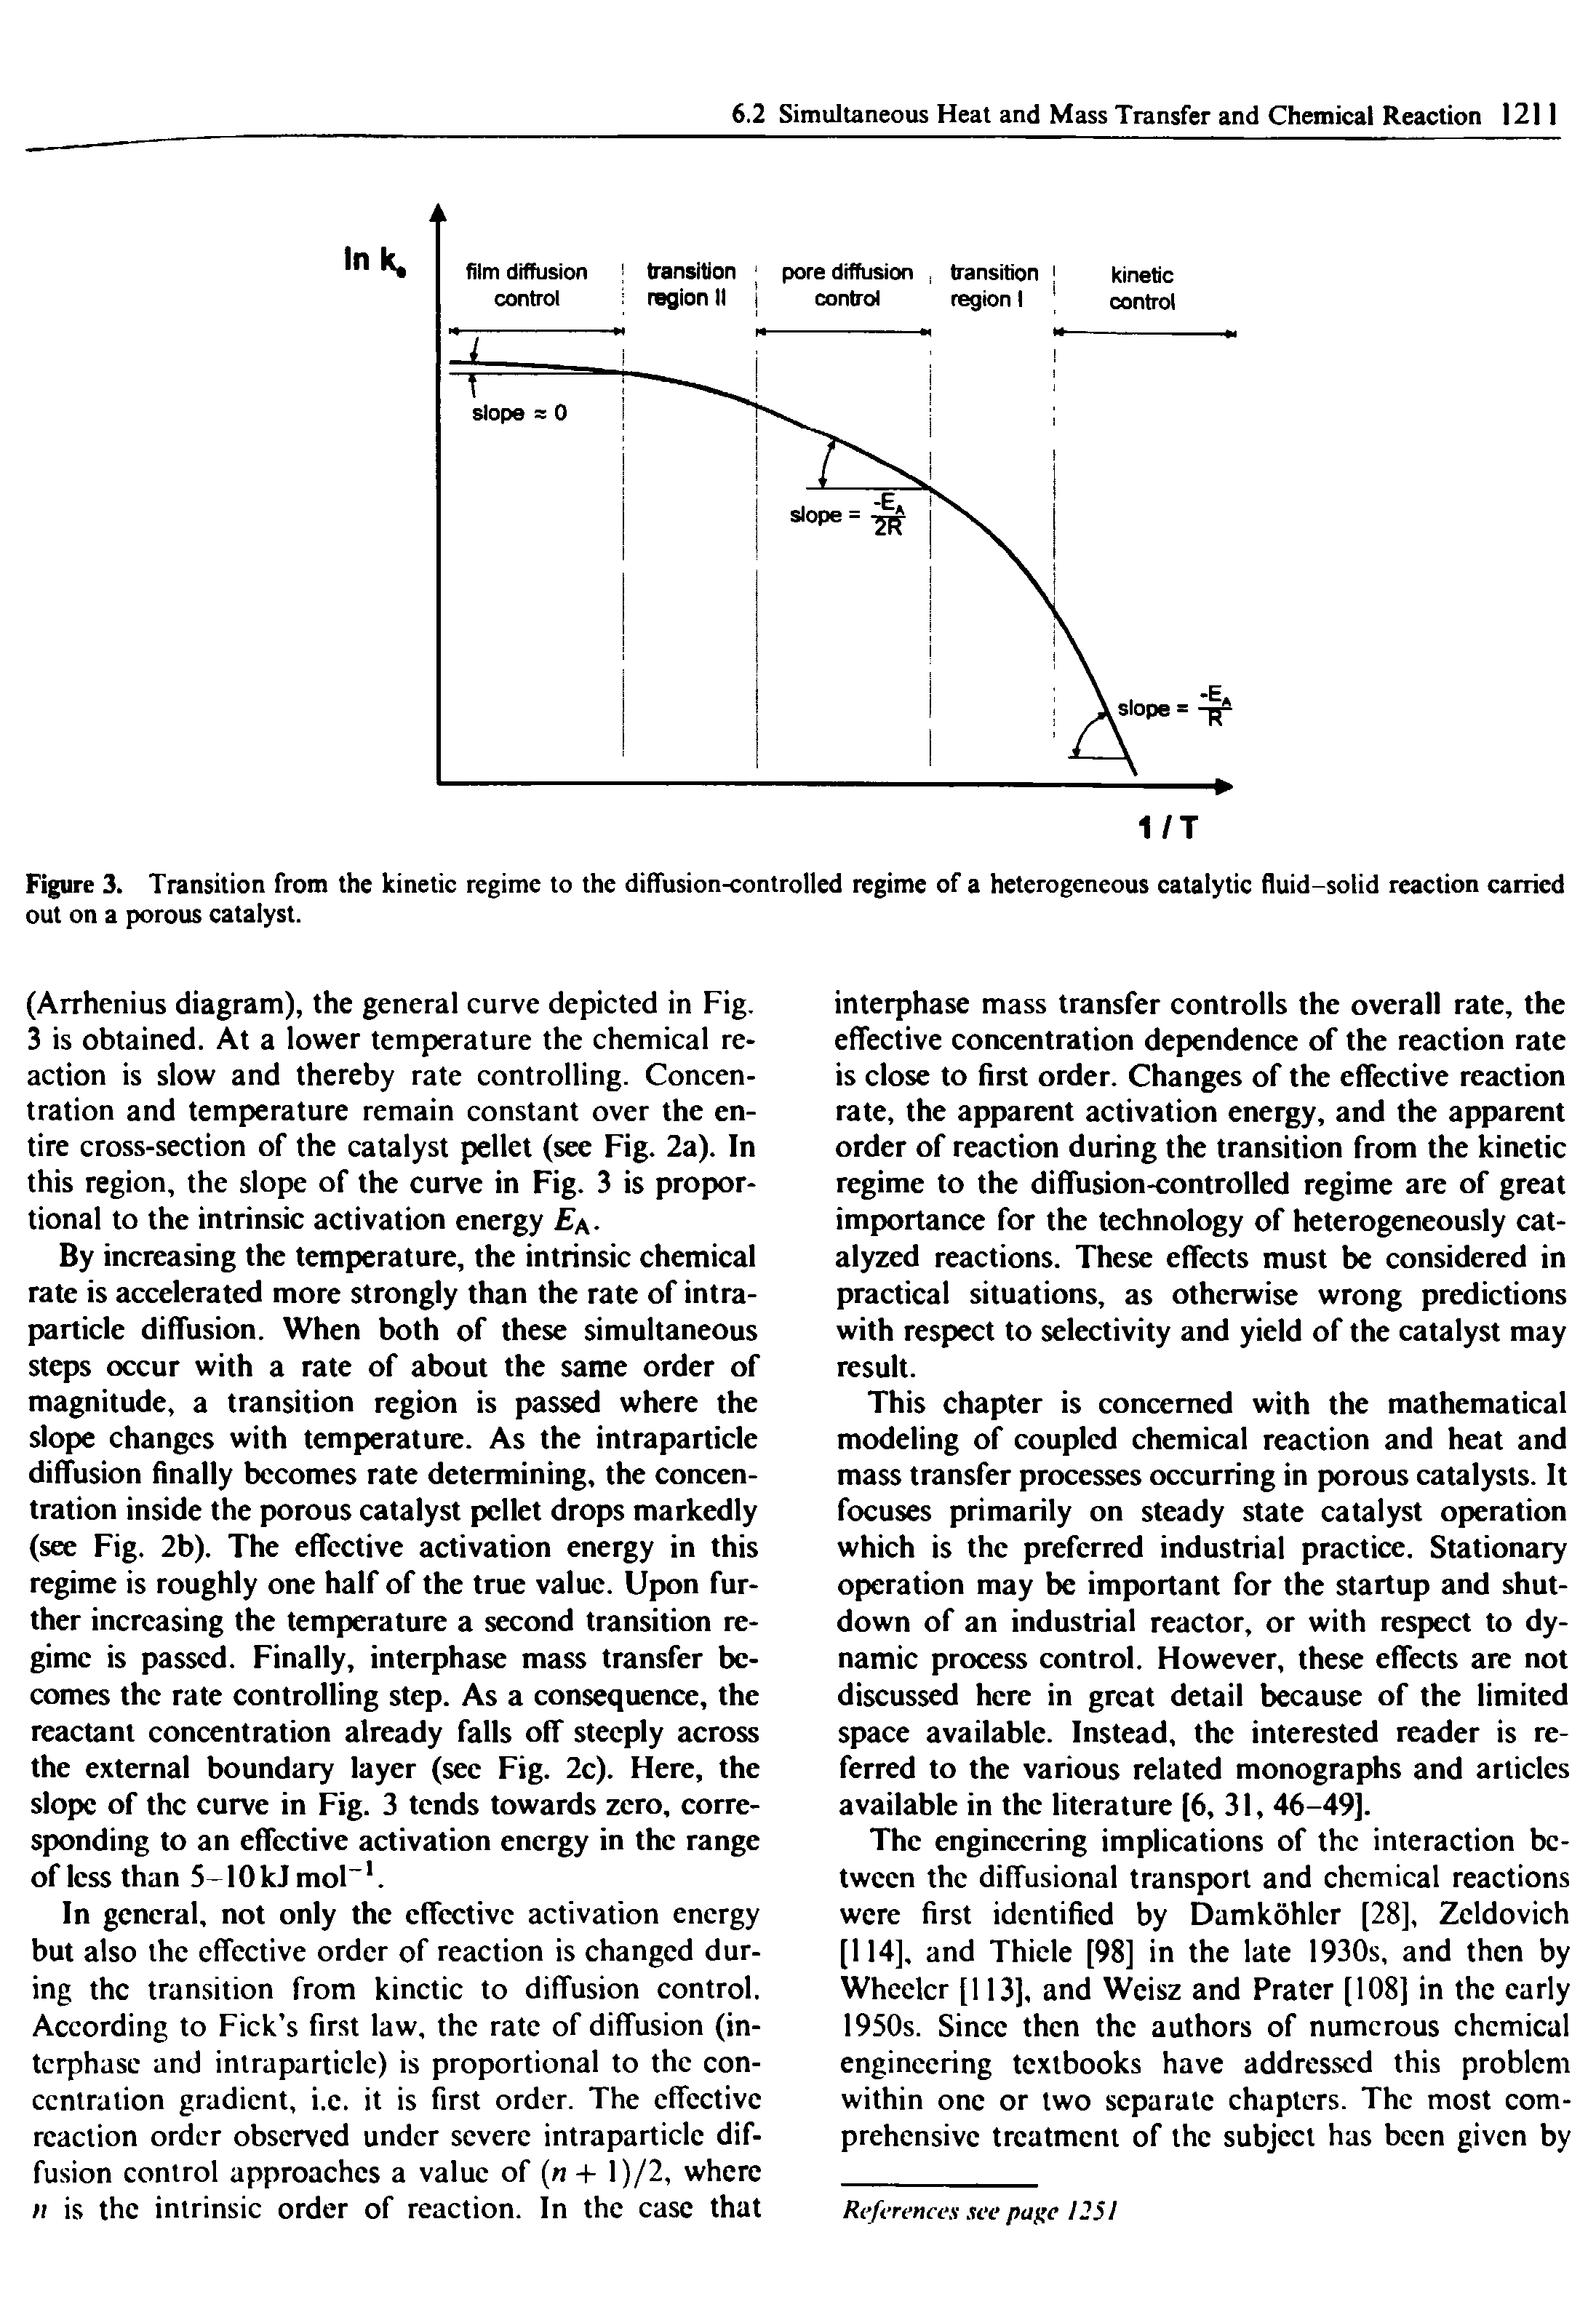 Figure 3. Transition from the kinetic regime to the diffusion-controlled regime of a heterogeneous catalytic fluid-solid reaction carried out on a porous catalyst.